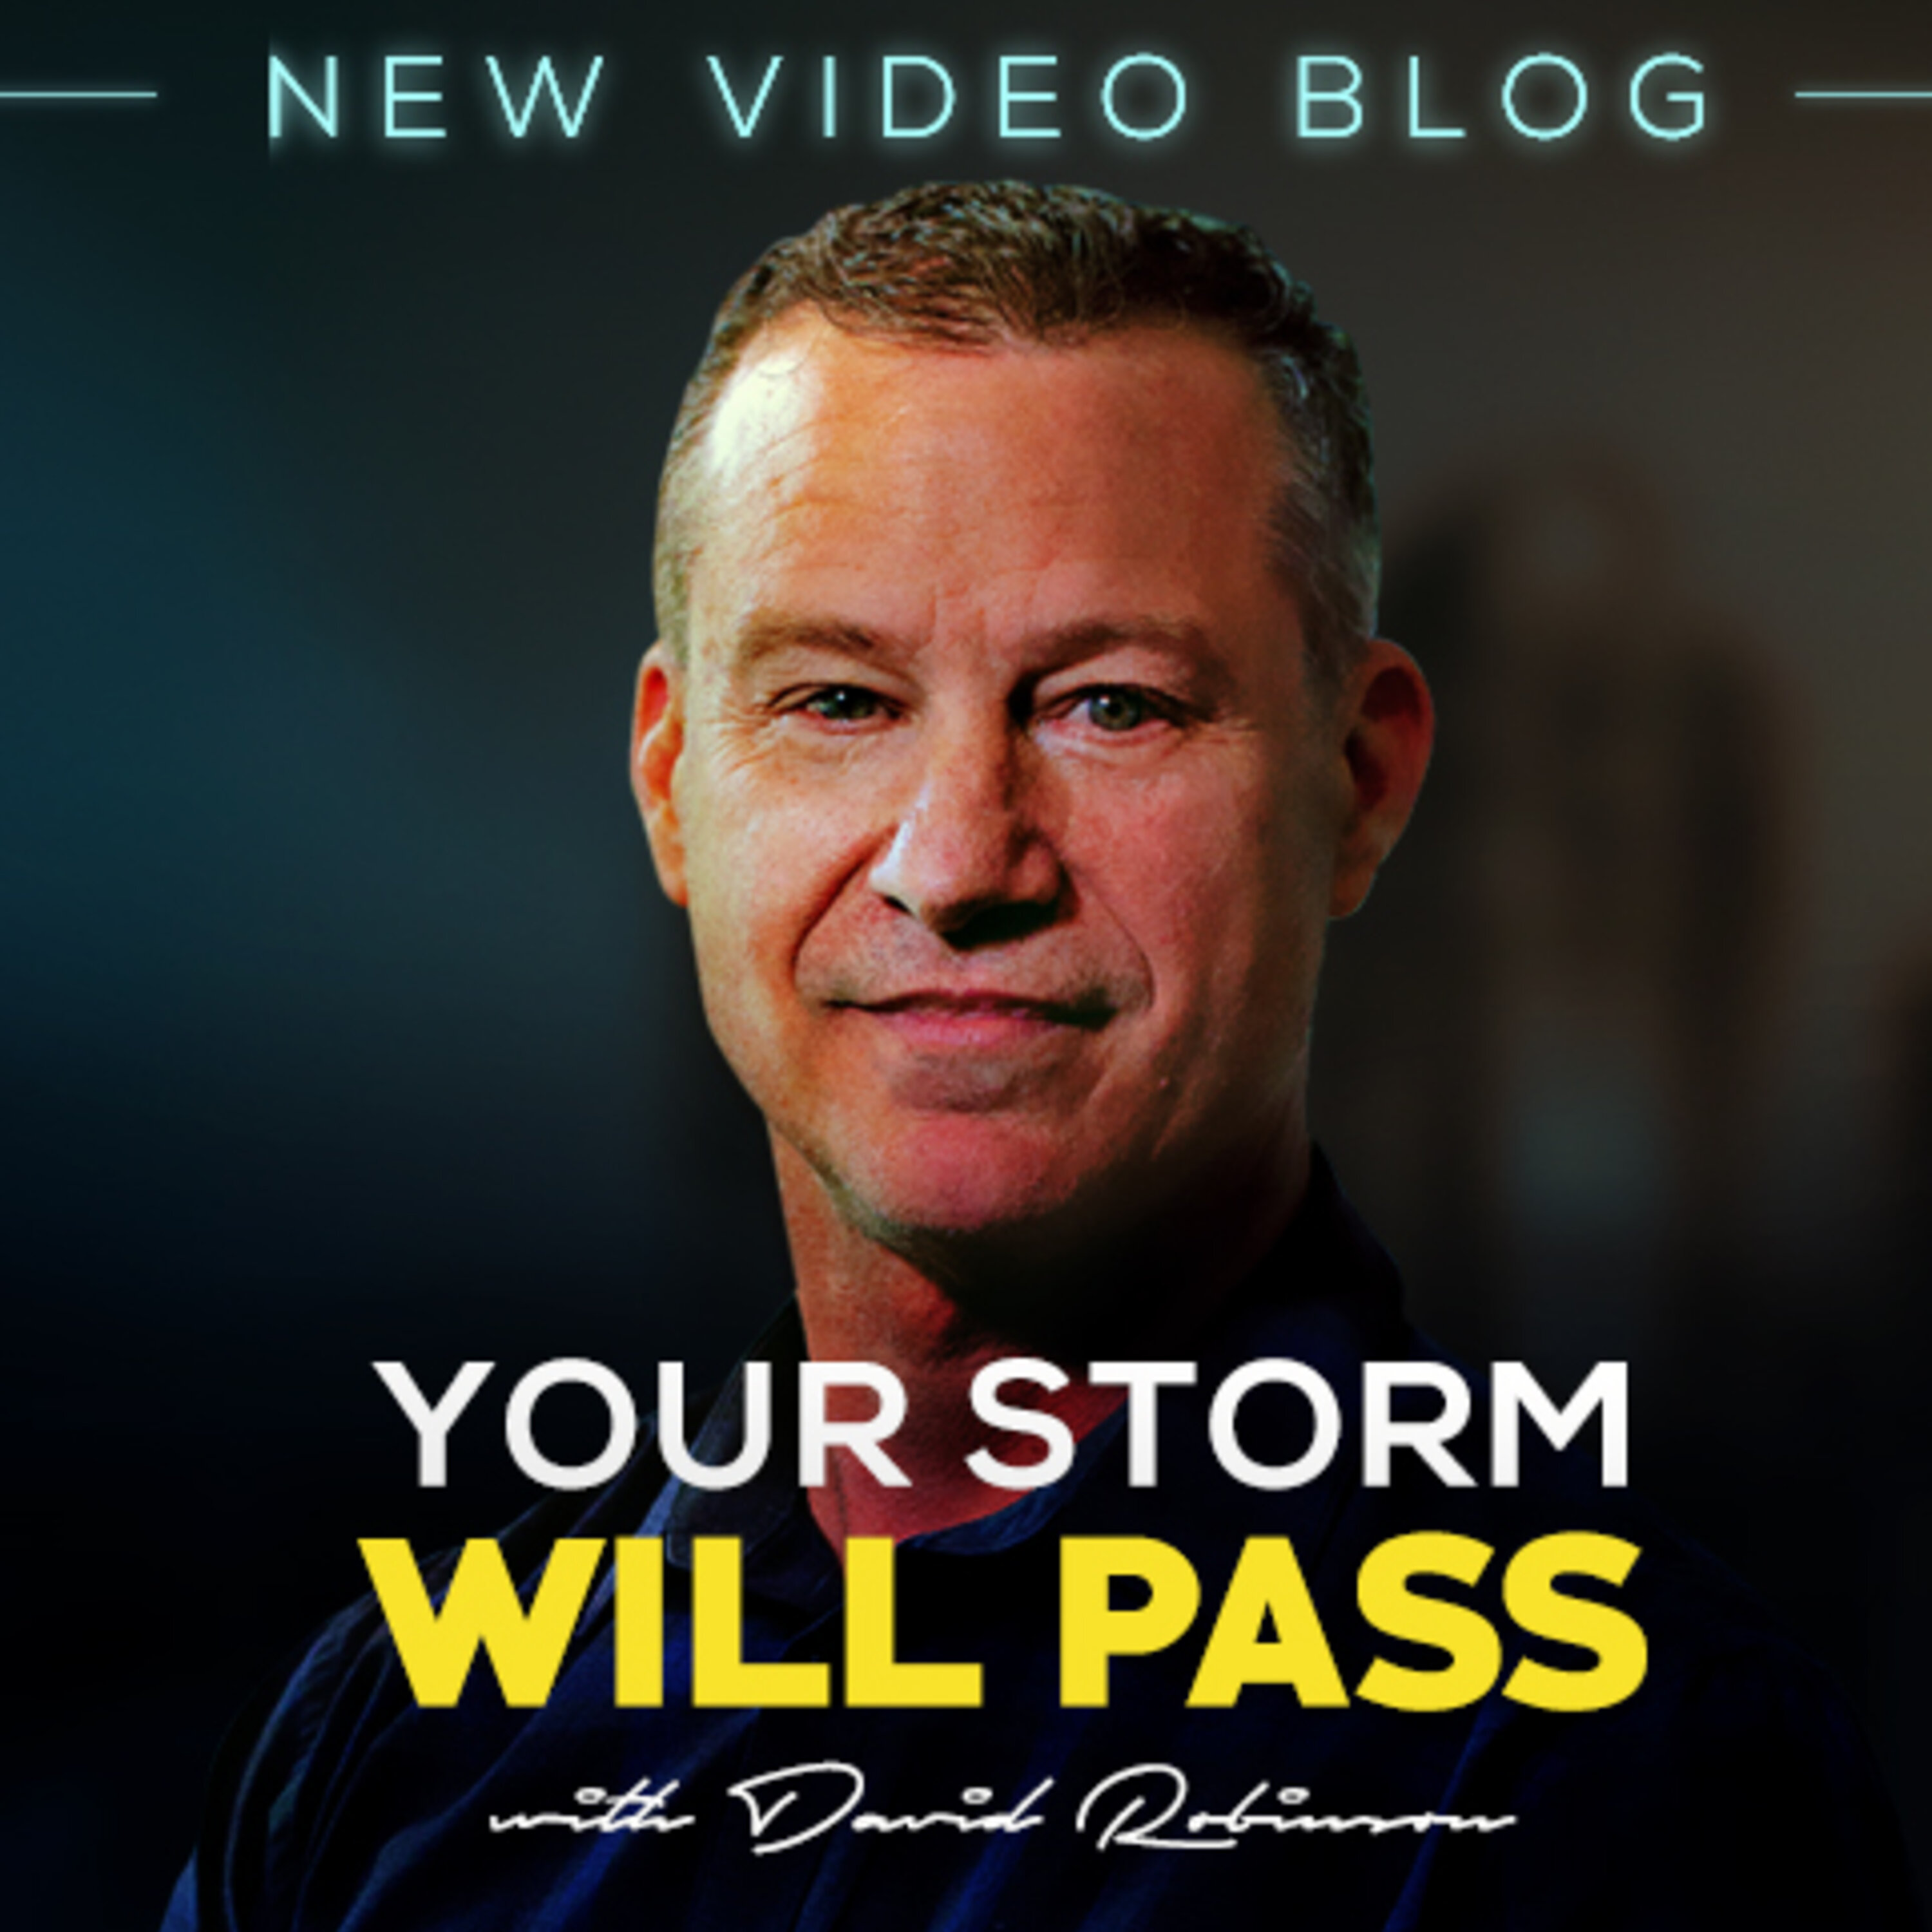 David Robinson - Your Storm WILL Pass